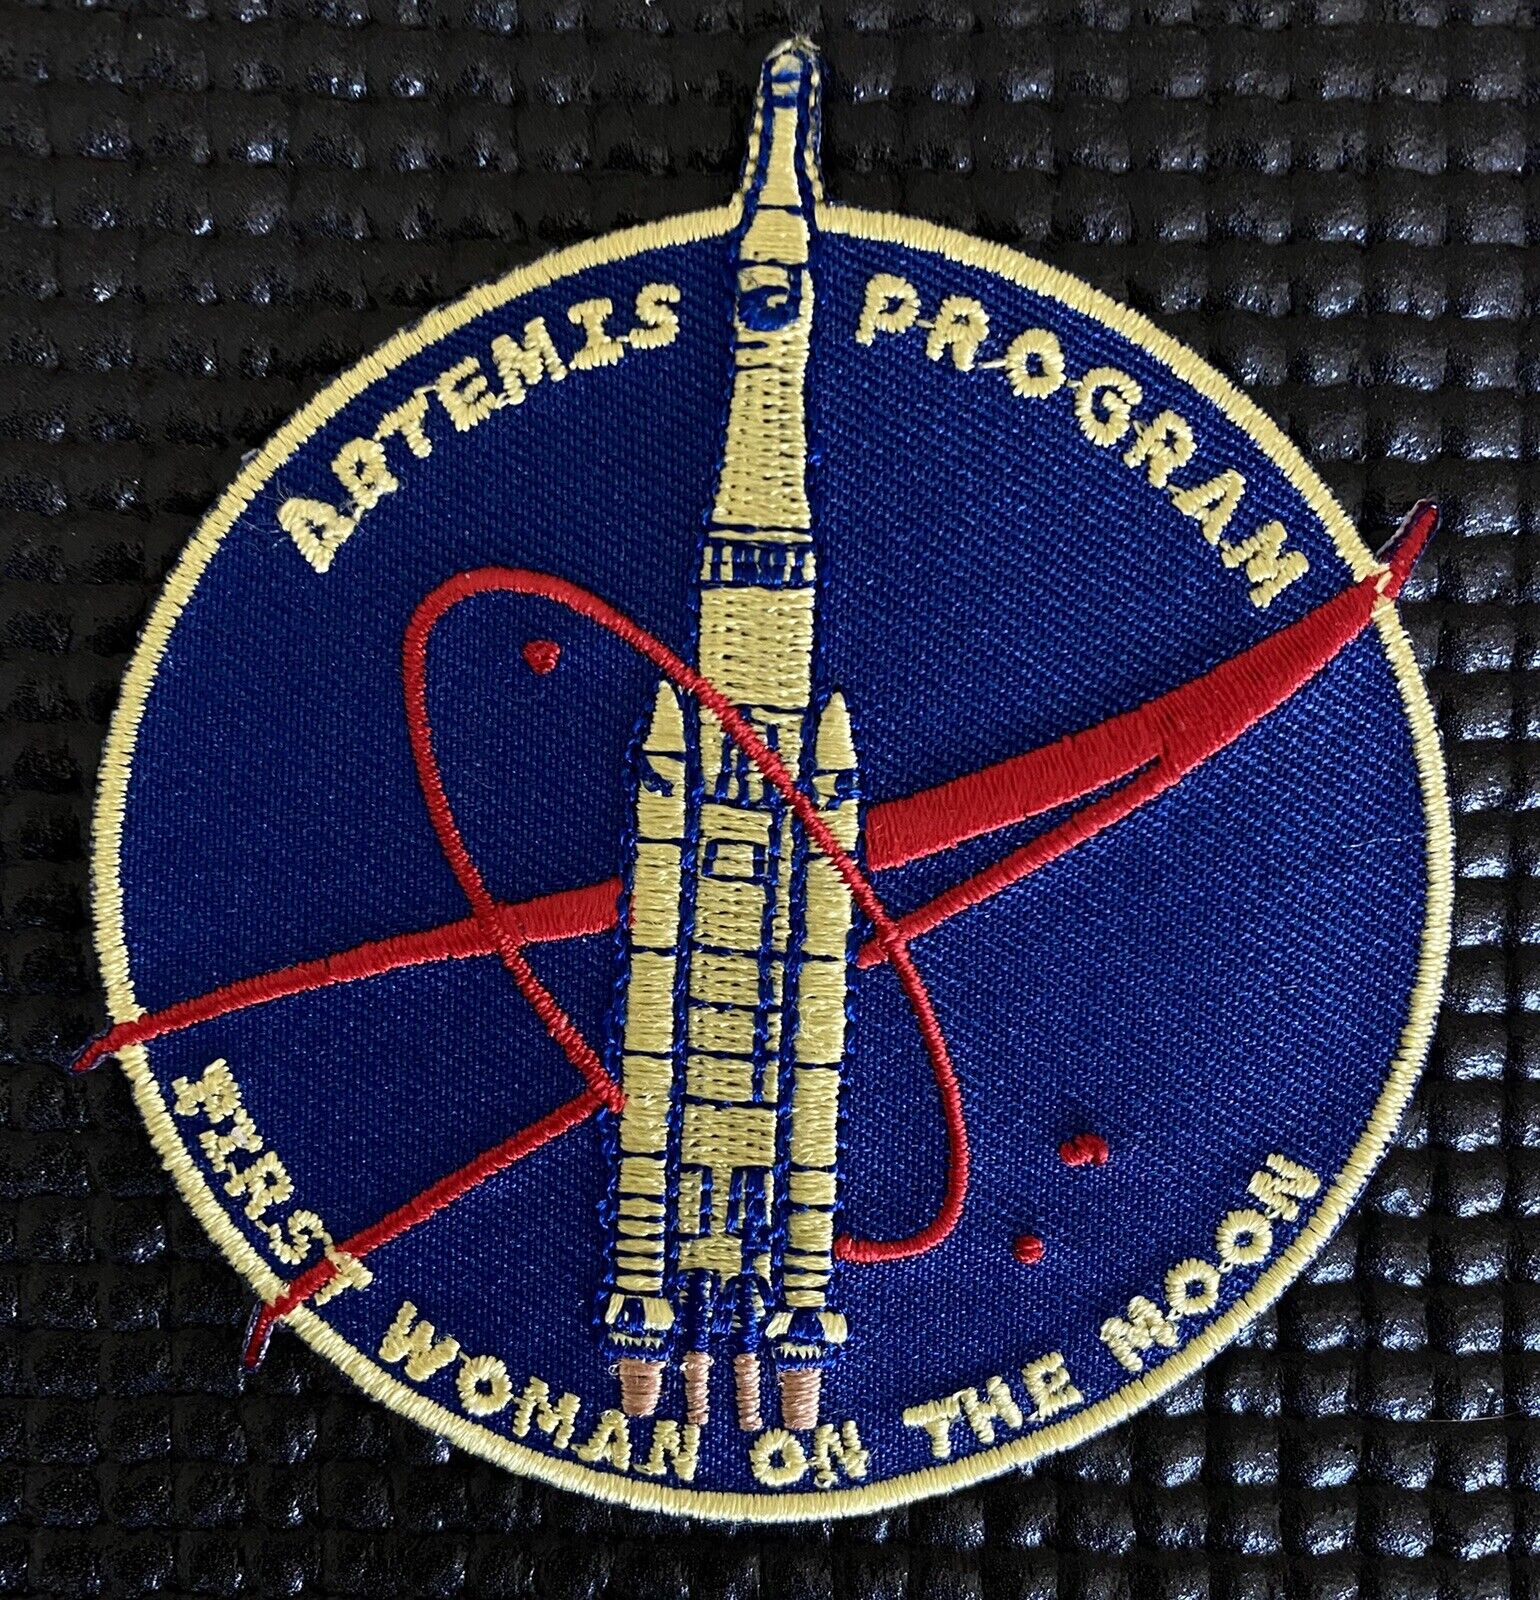 NASA ARTEMIS PROGRAM 2024 FIRST WOMAN ON MOON - ASTRONAUT MISSION PATCH - 3.5”